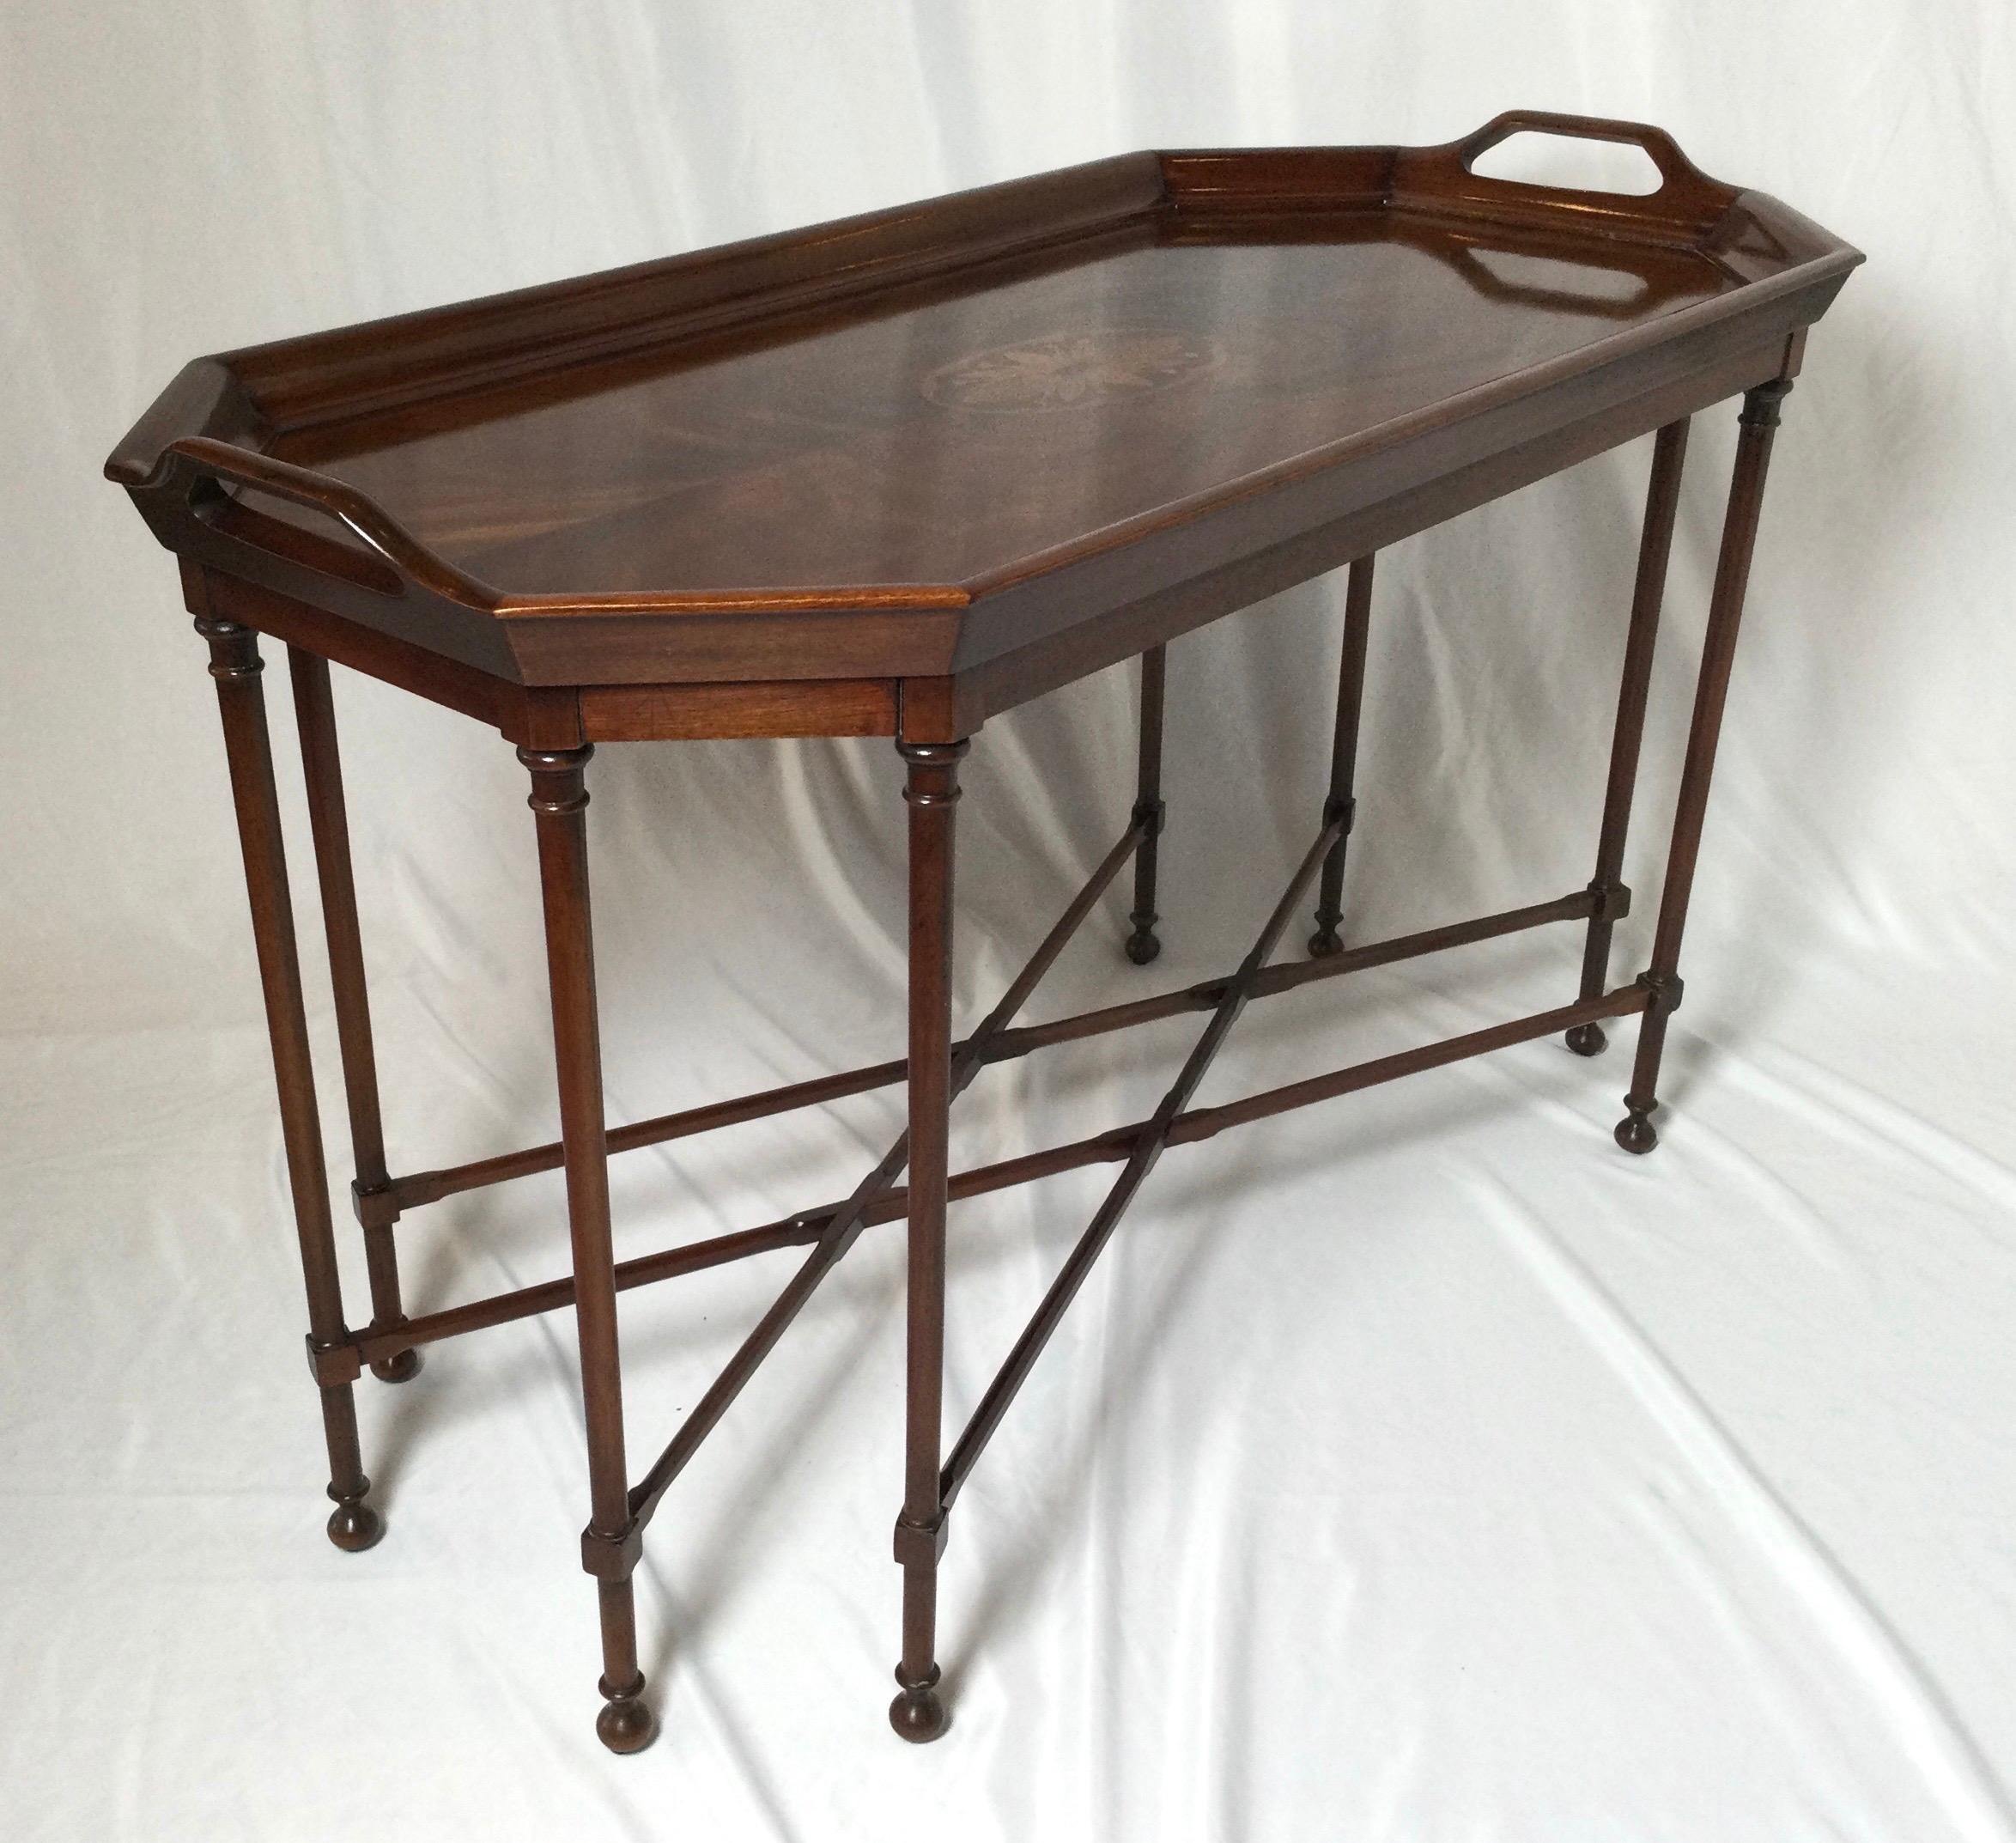 Elegant formal flame mahogany cocktail table with inlaid center medallion. The handled top with attached slender legs with a criss-cross stretcher base. This table is a smaller size with a European height.